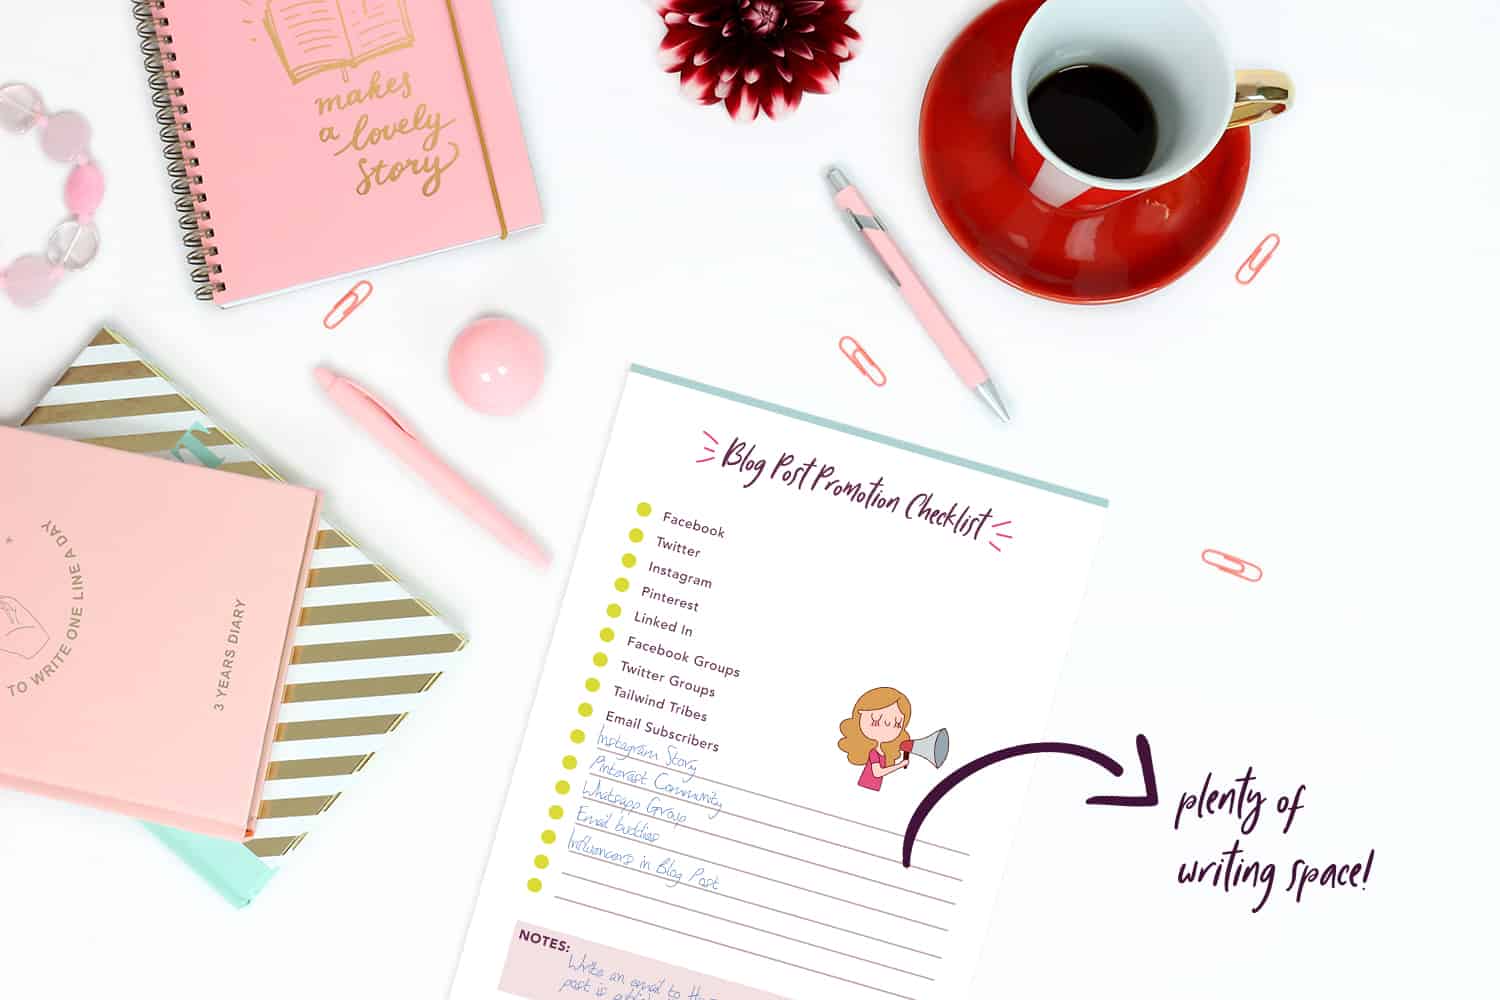 The key to having a good blog content strategy is to decide what newsletters you will send in advance. This Blog Planner will really help you set your Blog in order!